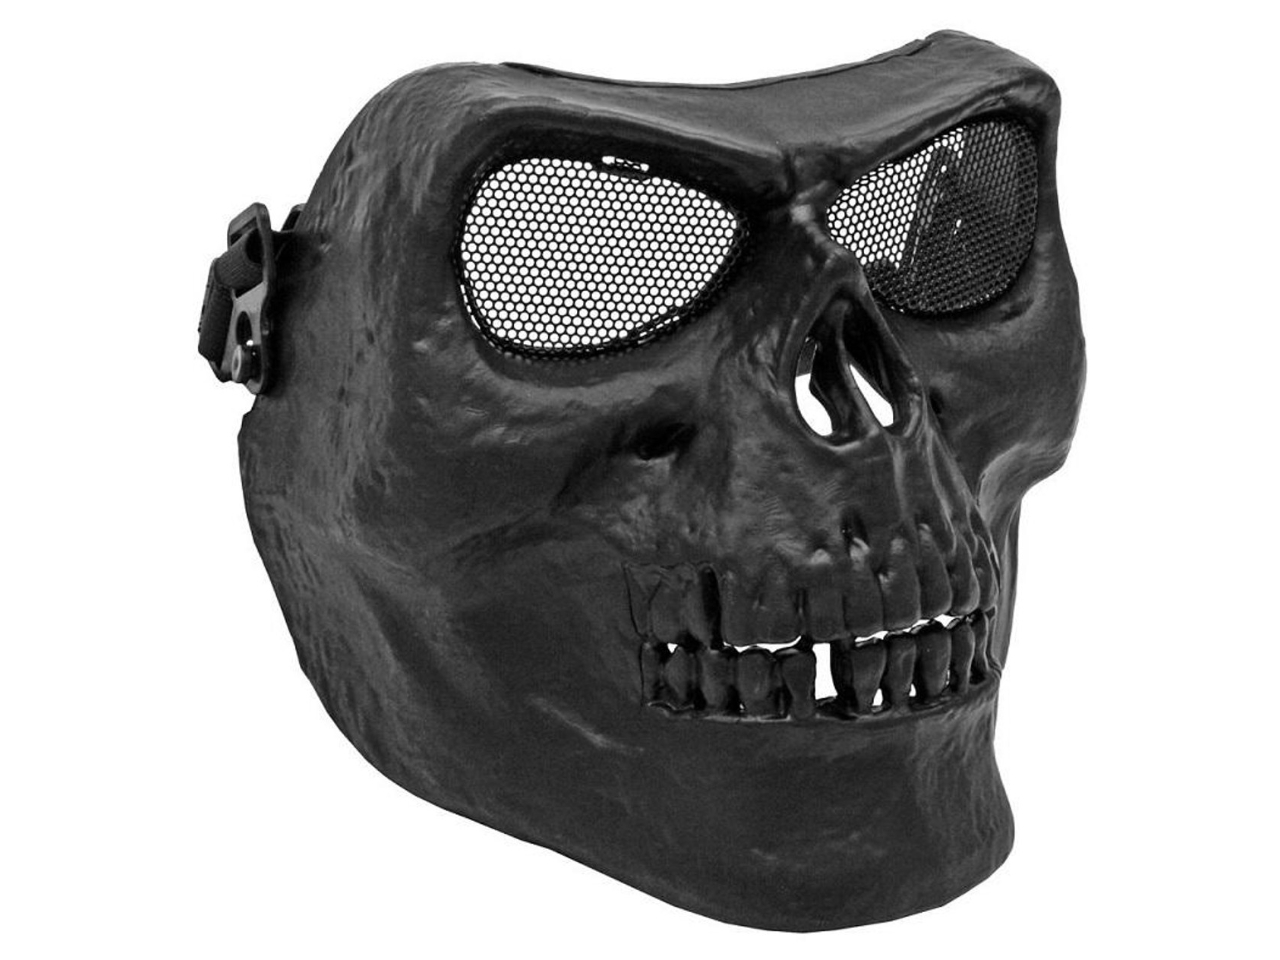 UK Arms Full Face Skull Mask for Airsoft, Black